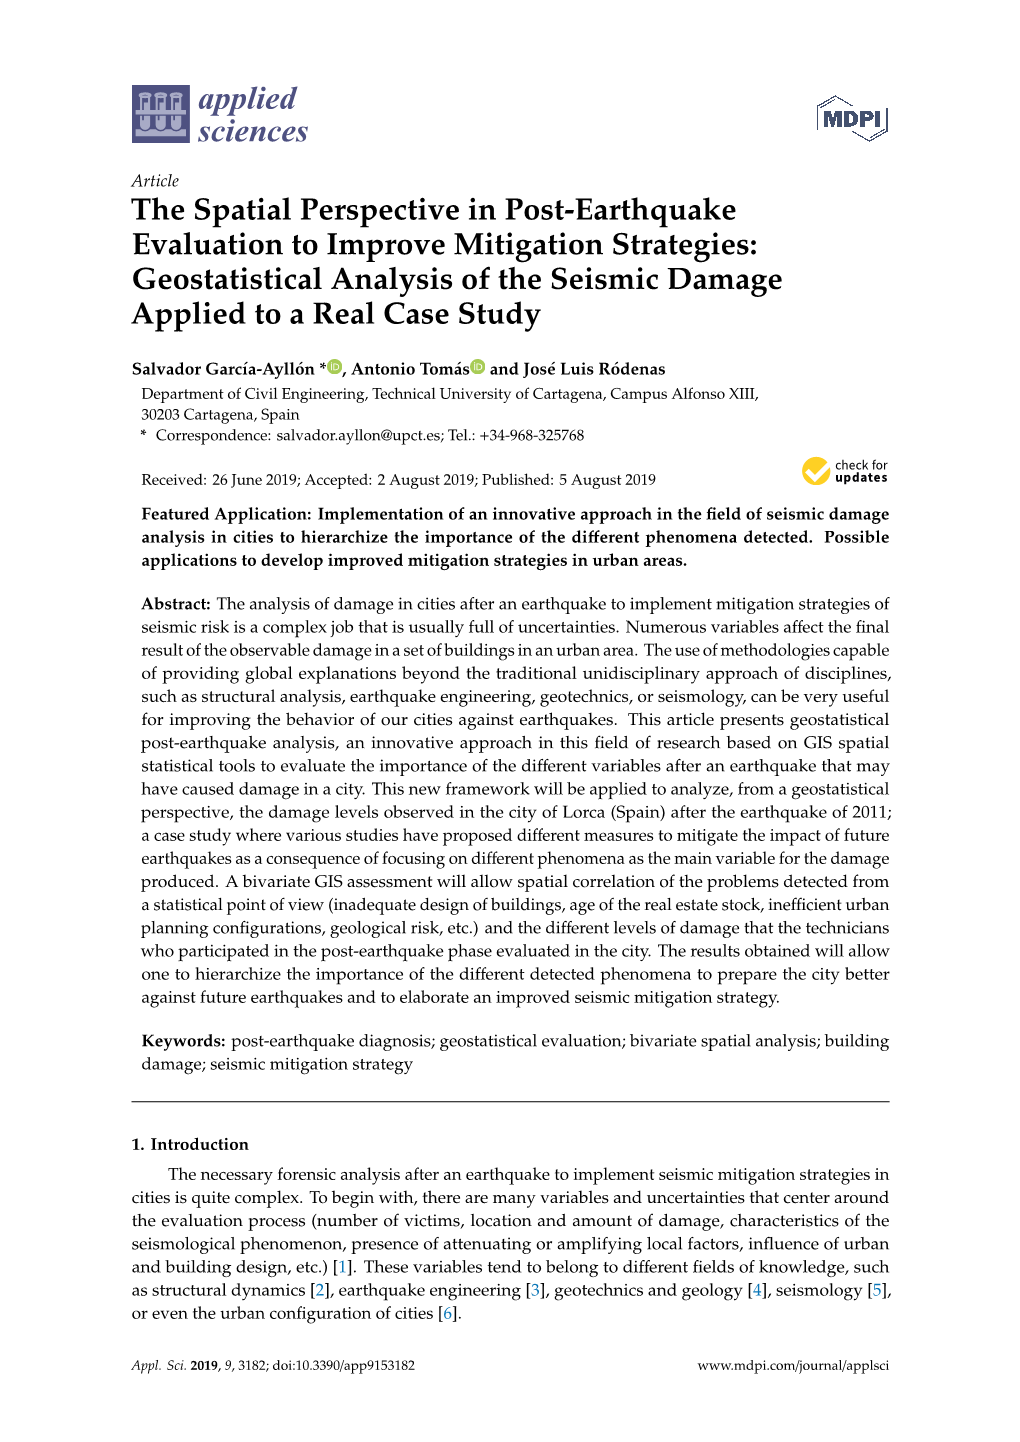 Geostatistical Analysis of the Seismic Damage Applied to a Real Case Study